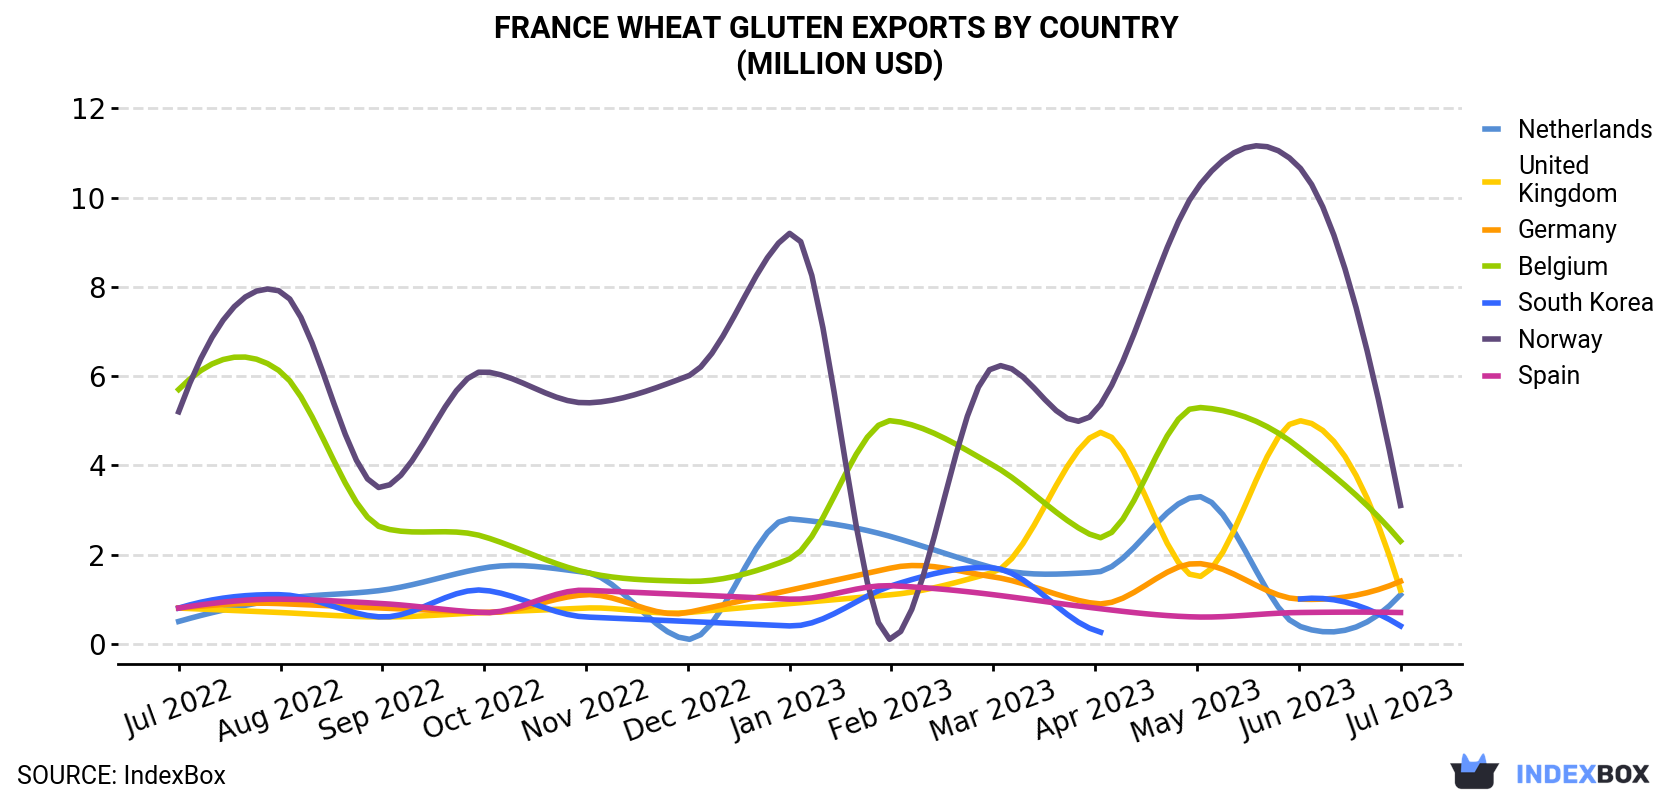 France Wheat Gluten Exports By Country (Million USD)